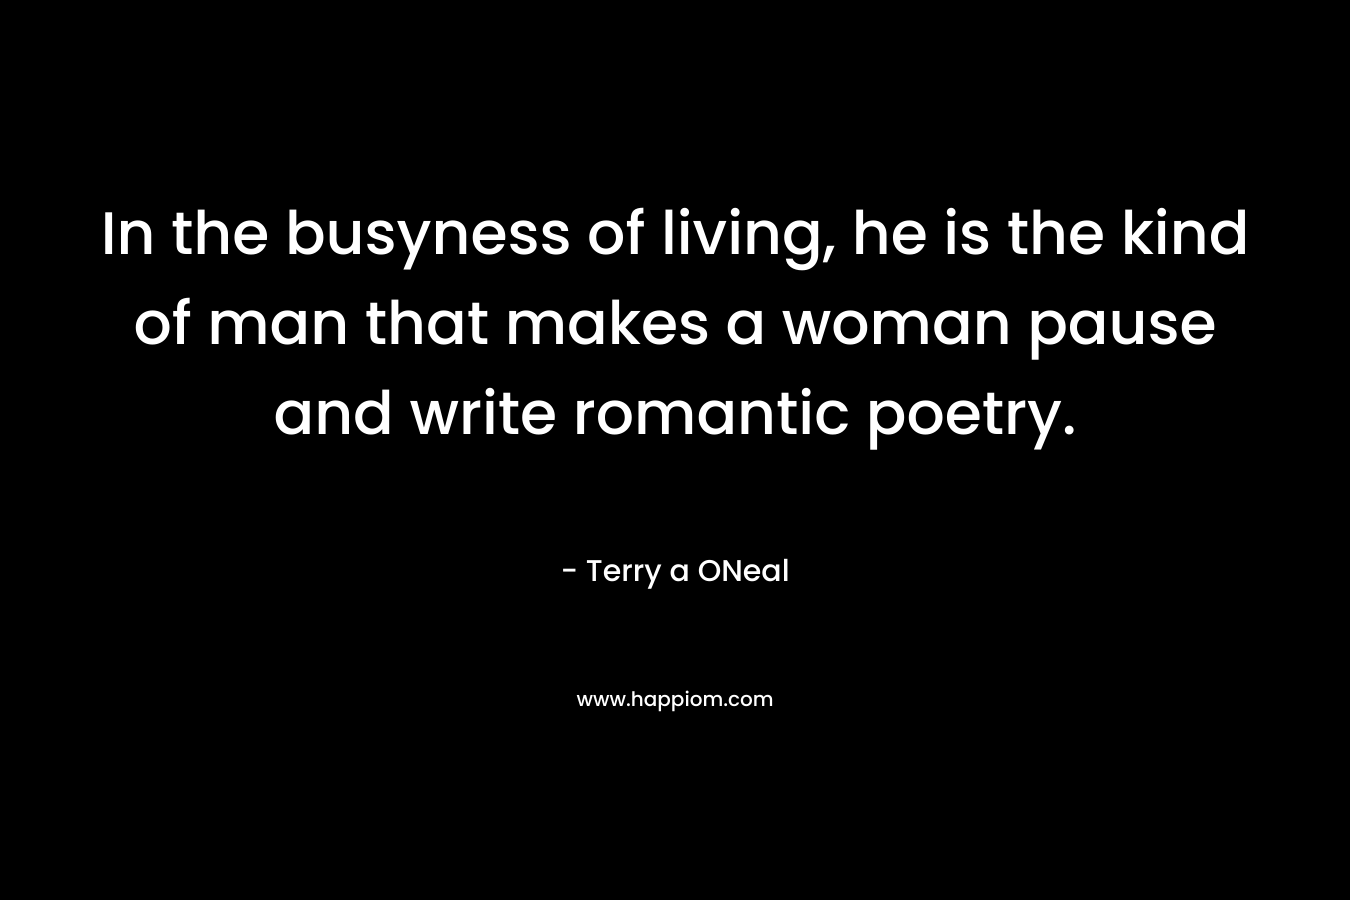 In the busyness of living, he is the kind of man that makes a woman pause and write romantic poetry. – Terry a ONeal